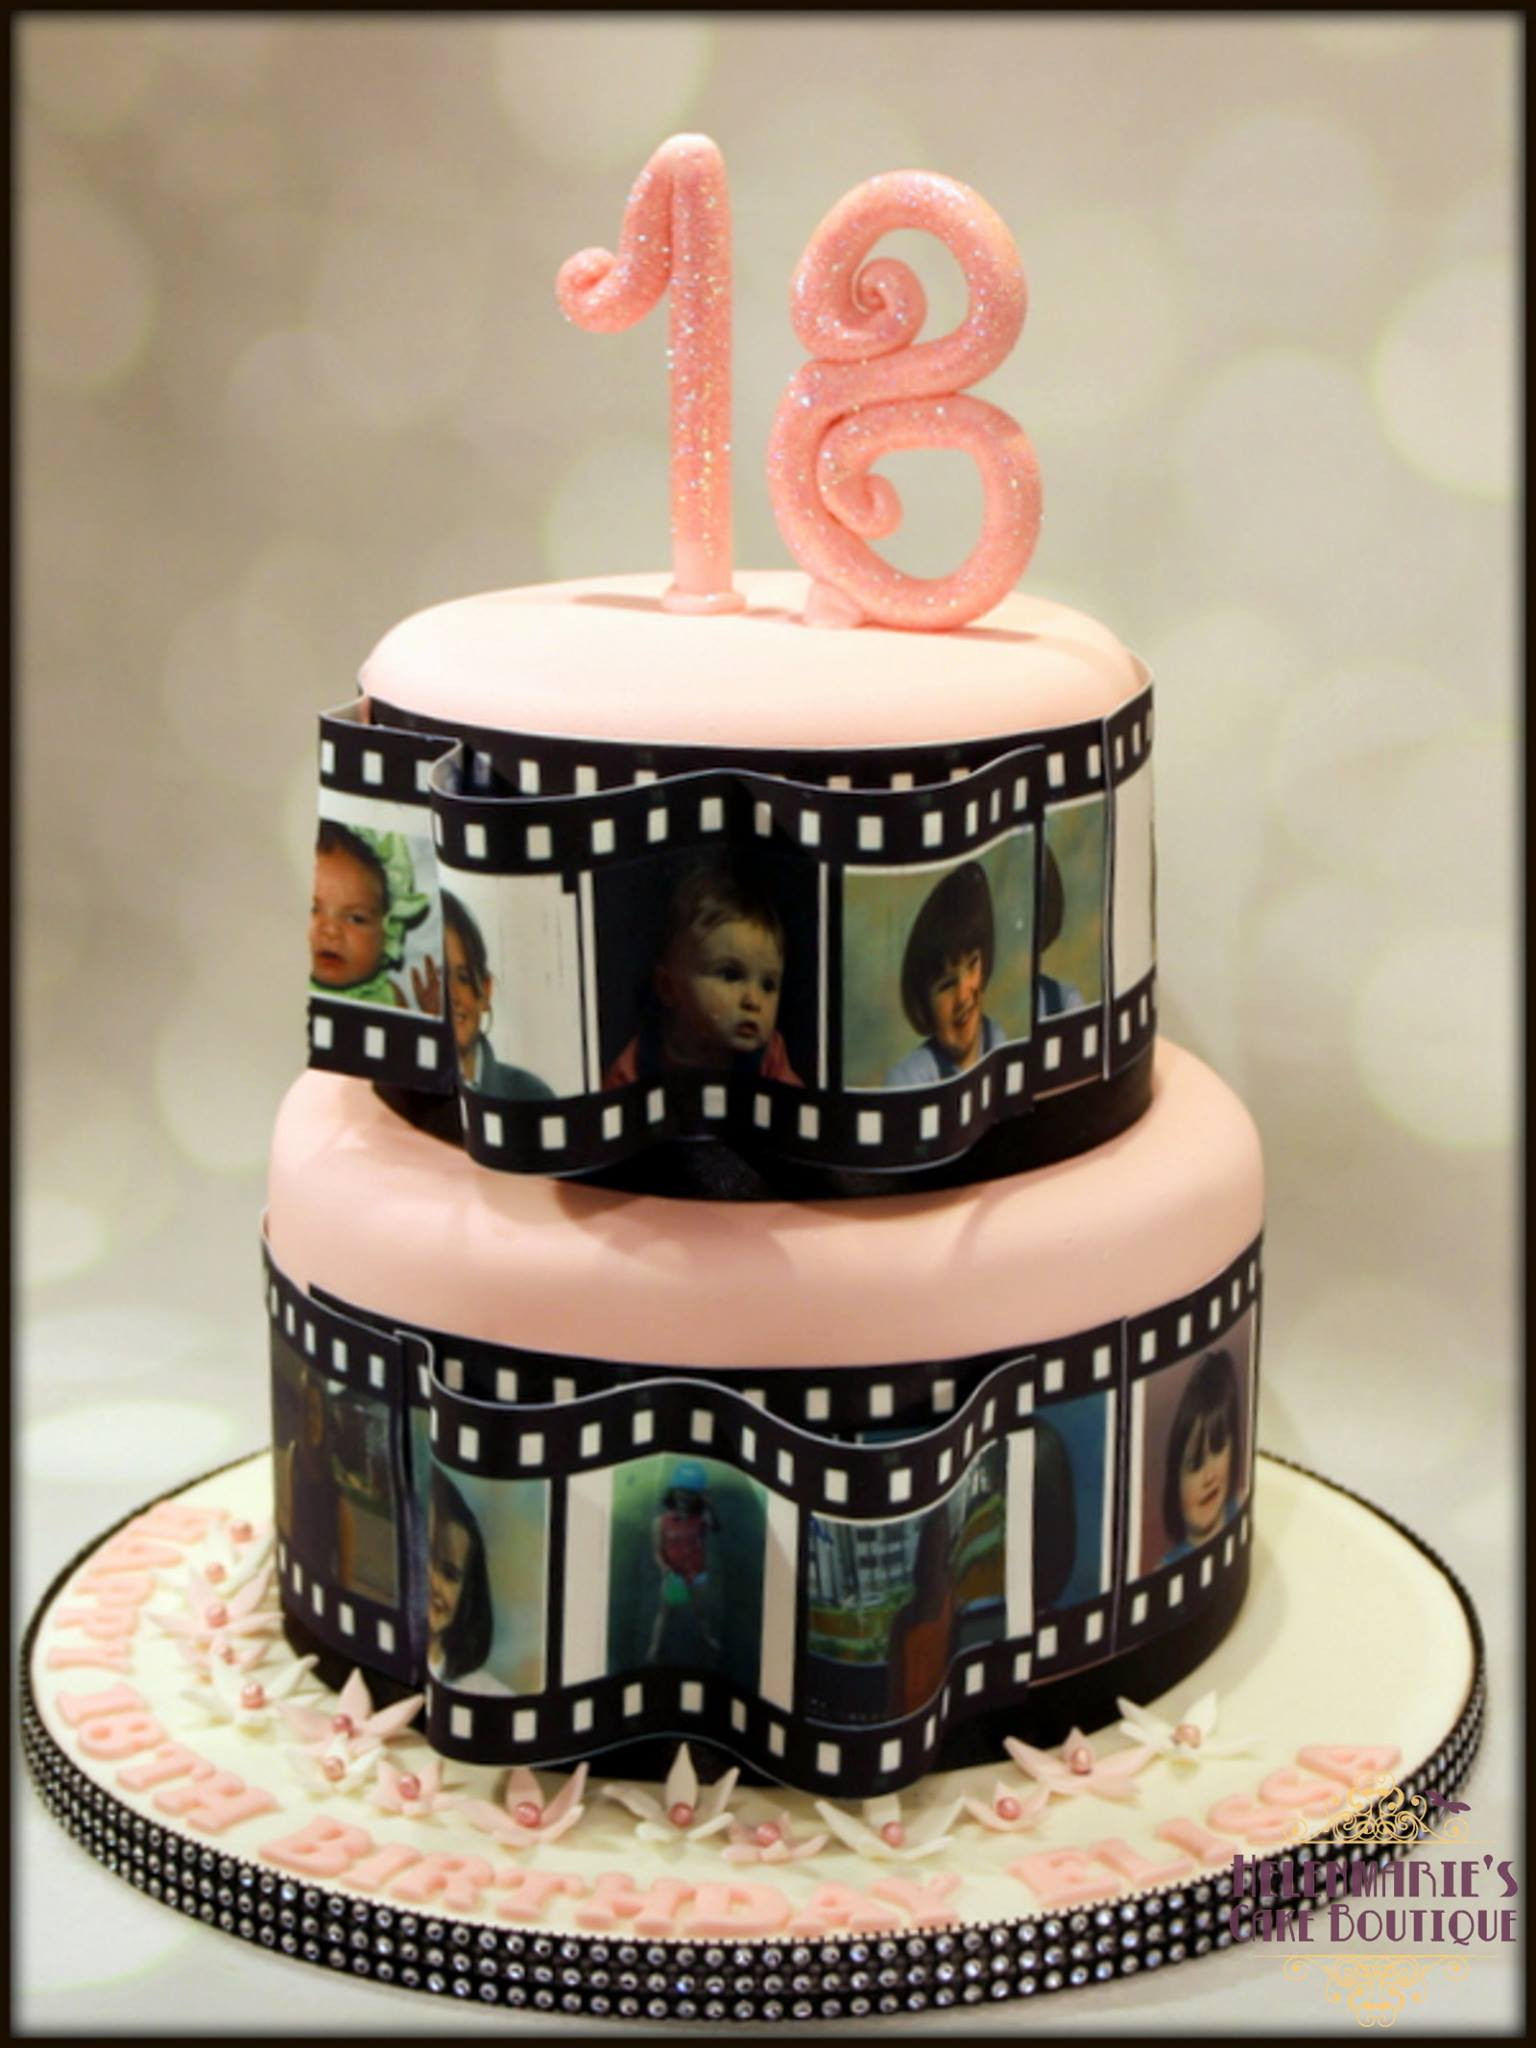 18 Birthday Cakes
 Reel cake for an 18th Birthday